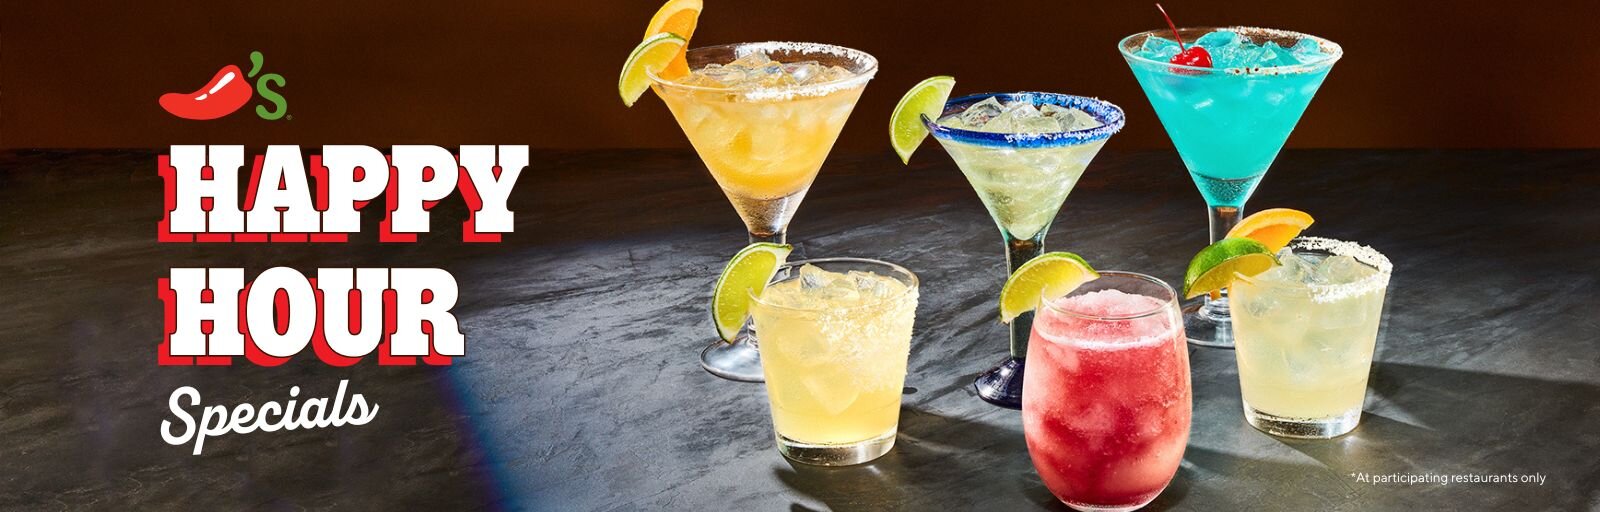 Chili's happy hour specials lockup with margarita and cocktail array on slate surface